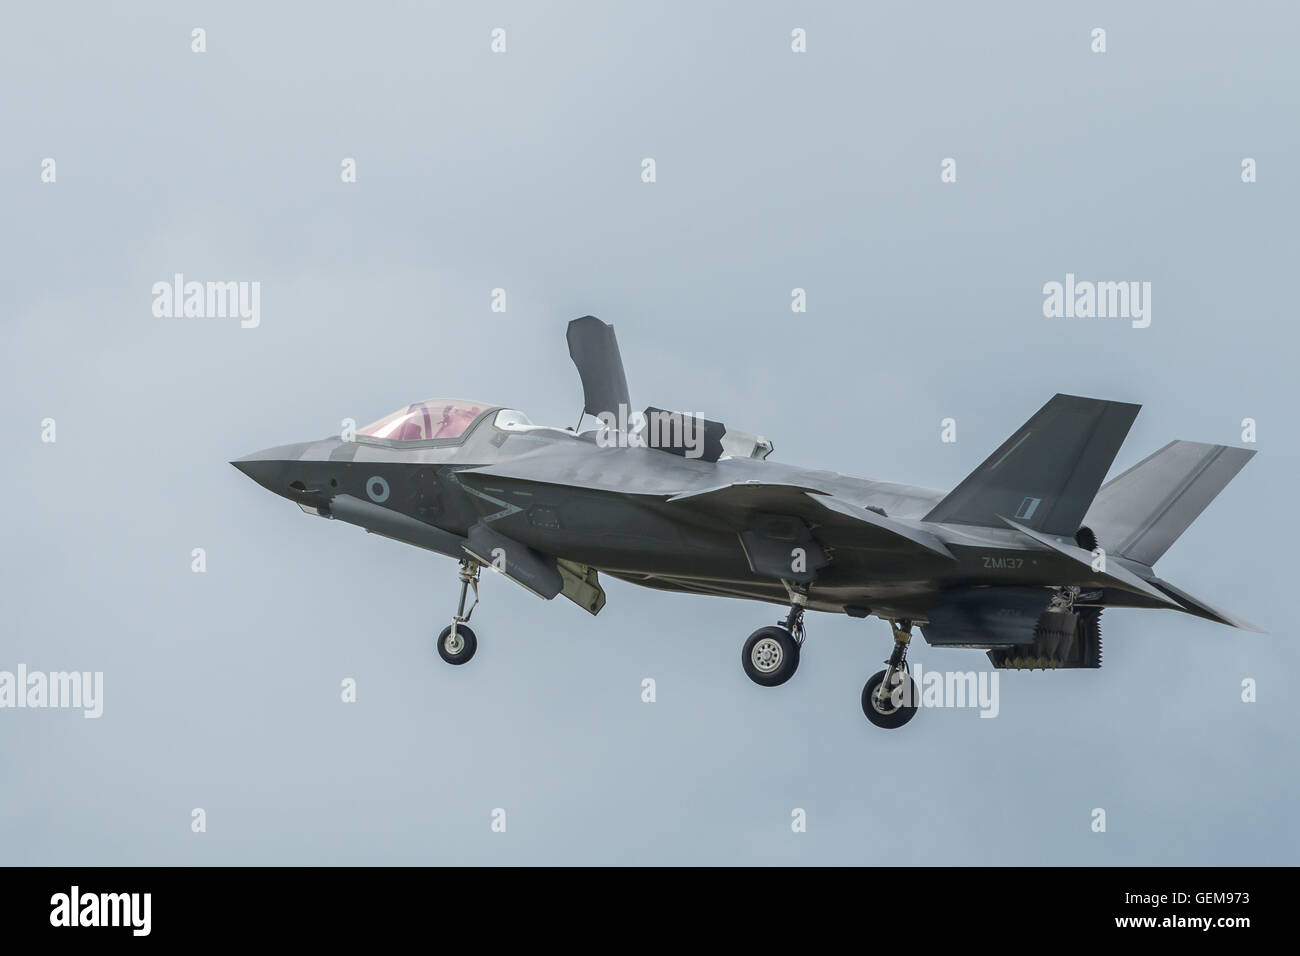 RAF F-35 Lightning 2 aircraft hovering at RAF Fairford for the Royal International Air Tattoo (RIAT) 2016. Stock Photo